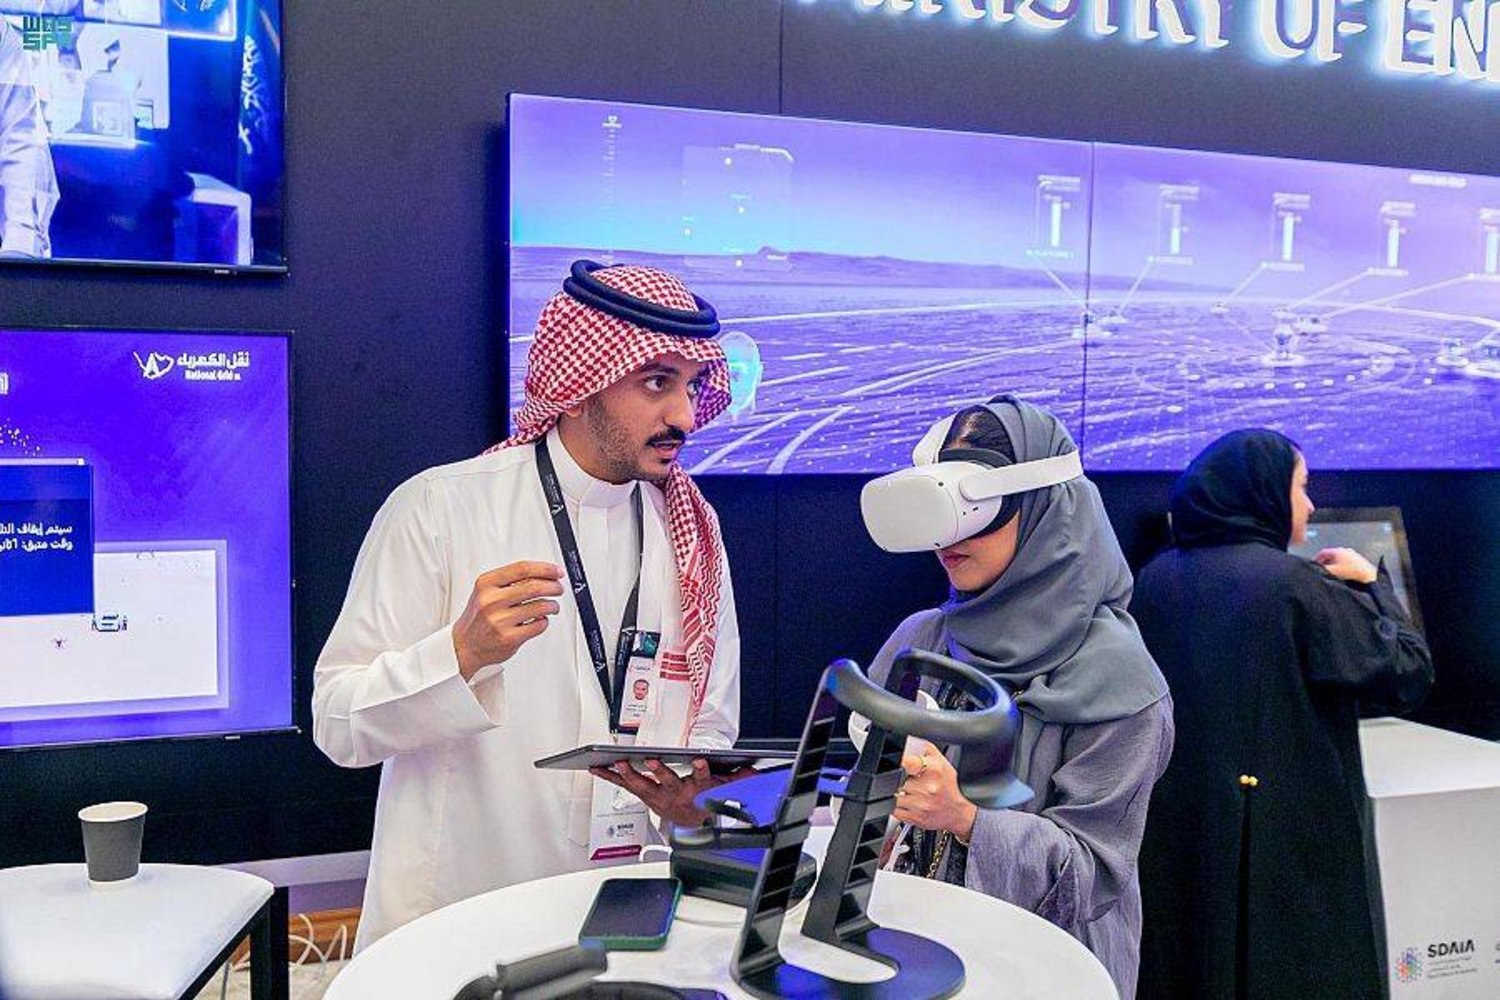 Saudi Arabia approves the establishment of an artificial intelligence center based in Riyadh - the International Center for Artificial Intelligence Research